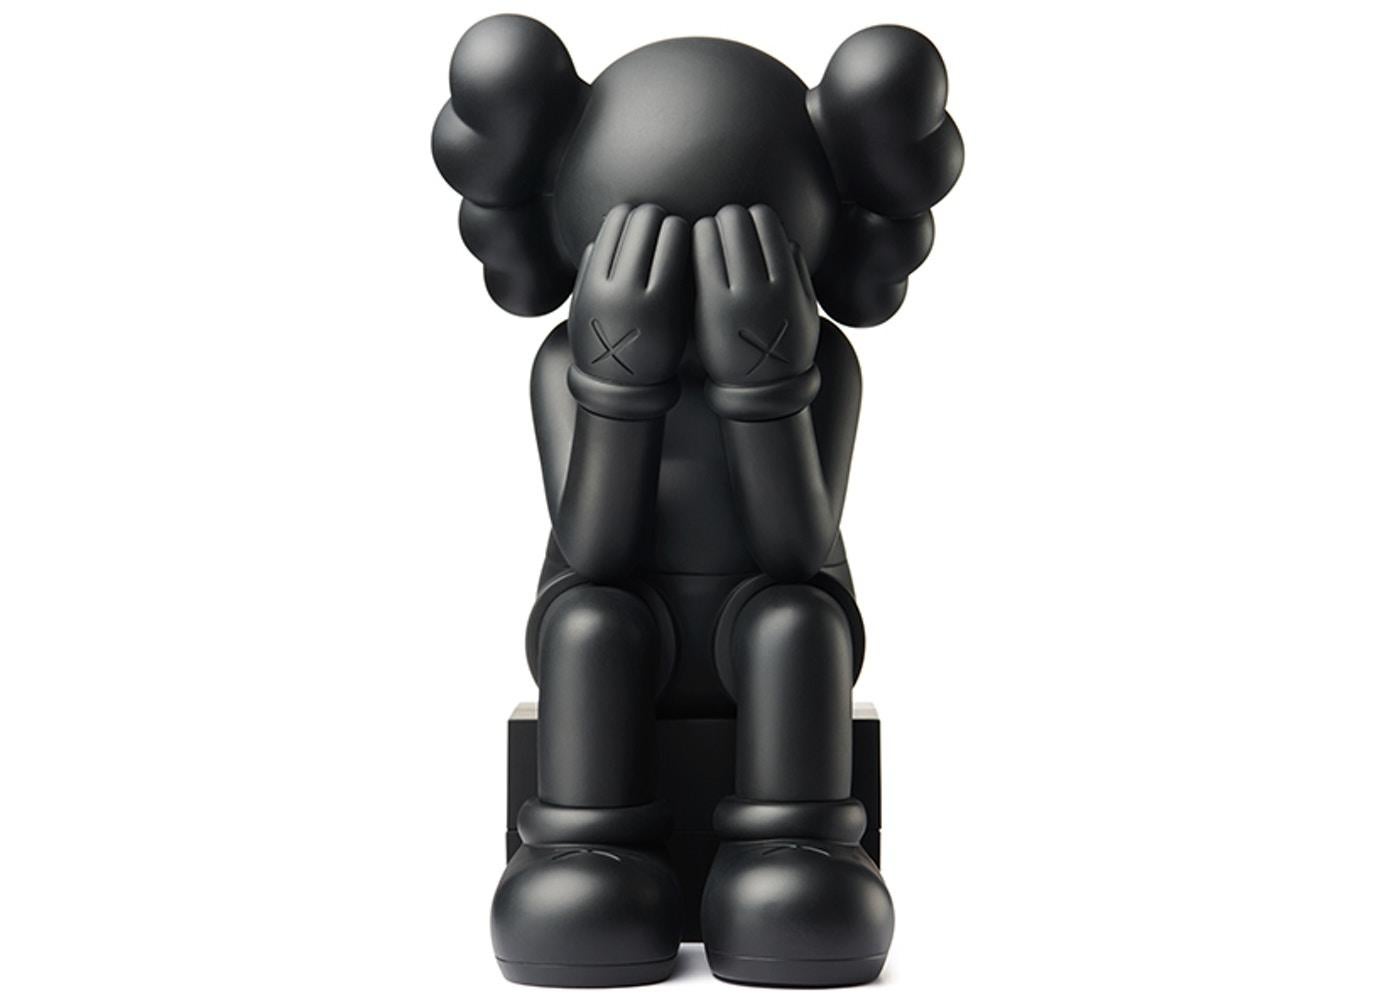 KAWS Black Companion Passing Through 2018. Black colorway. New in its original packaging. 
The most iconic of the KAWS Companions. This classic black KAWS Companion quickly sold out upon its 2018 release and is growing more and more scarce.